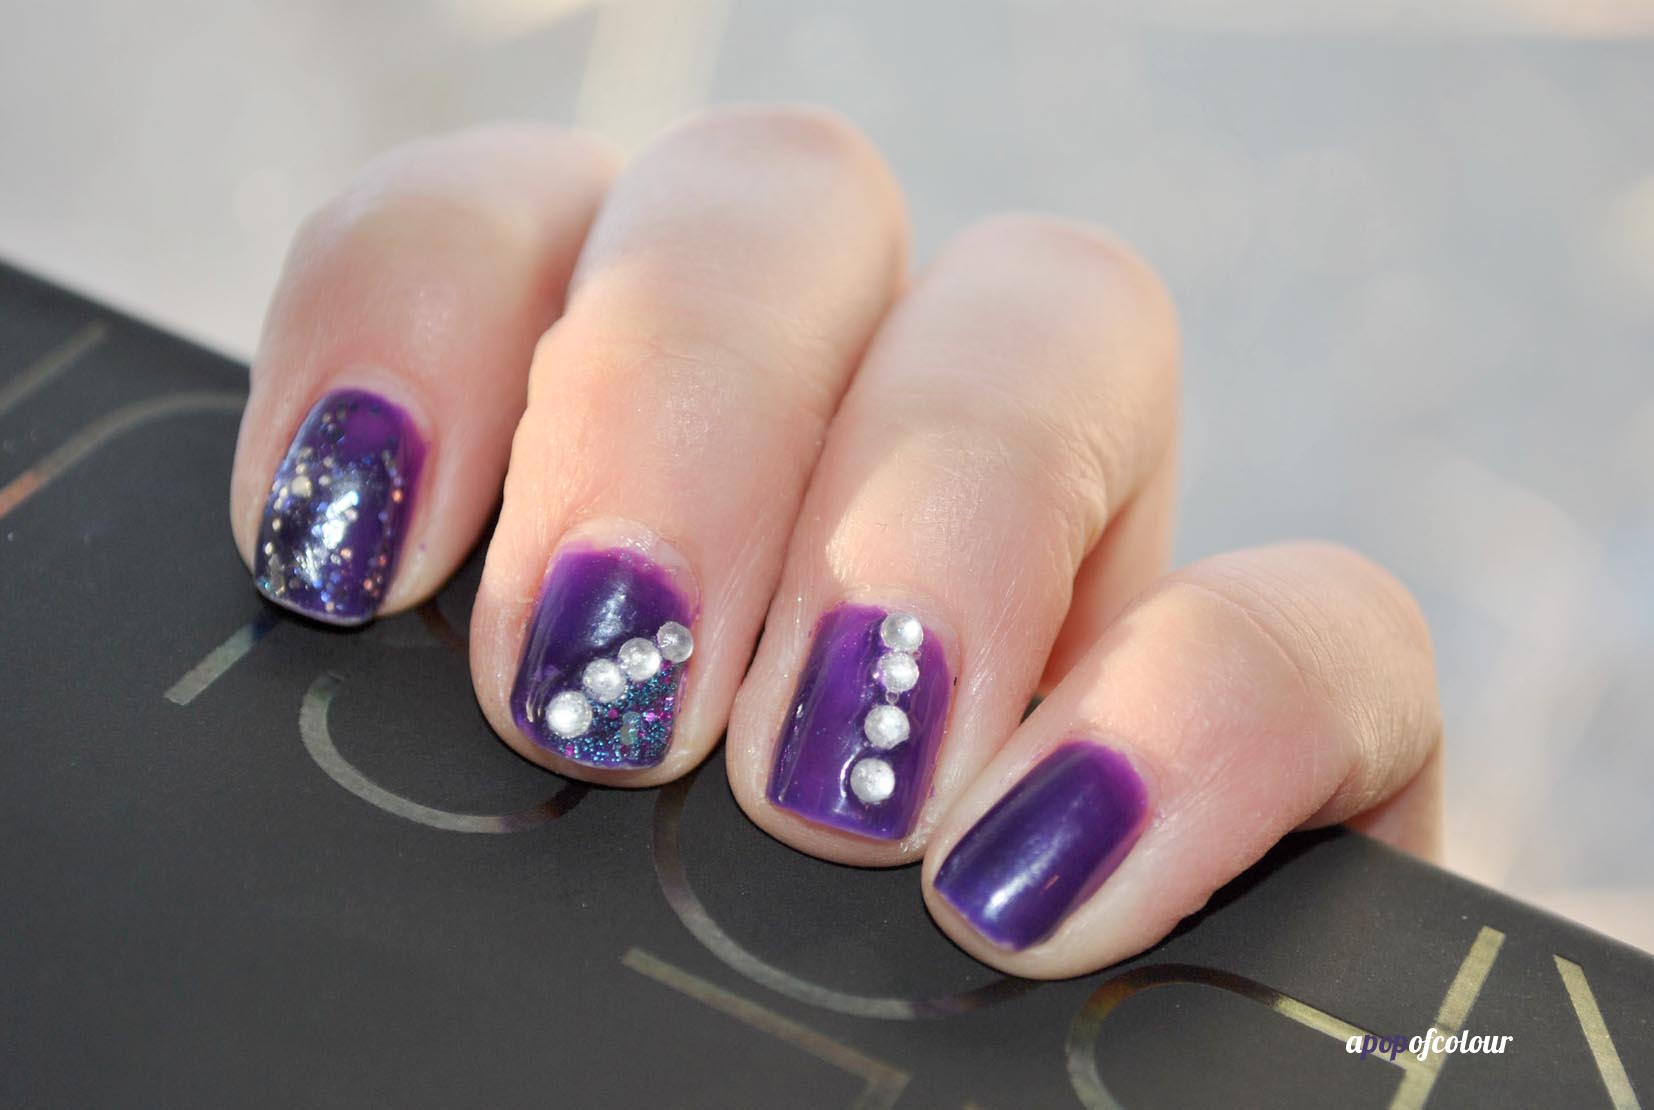 Nail Art Designs with Gems